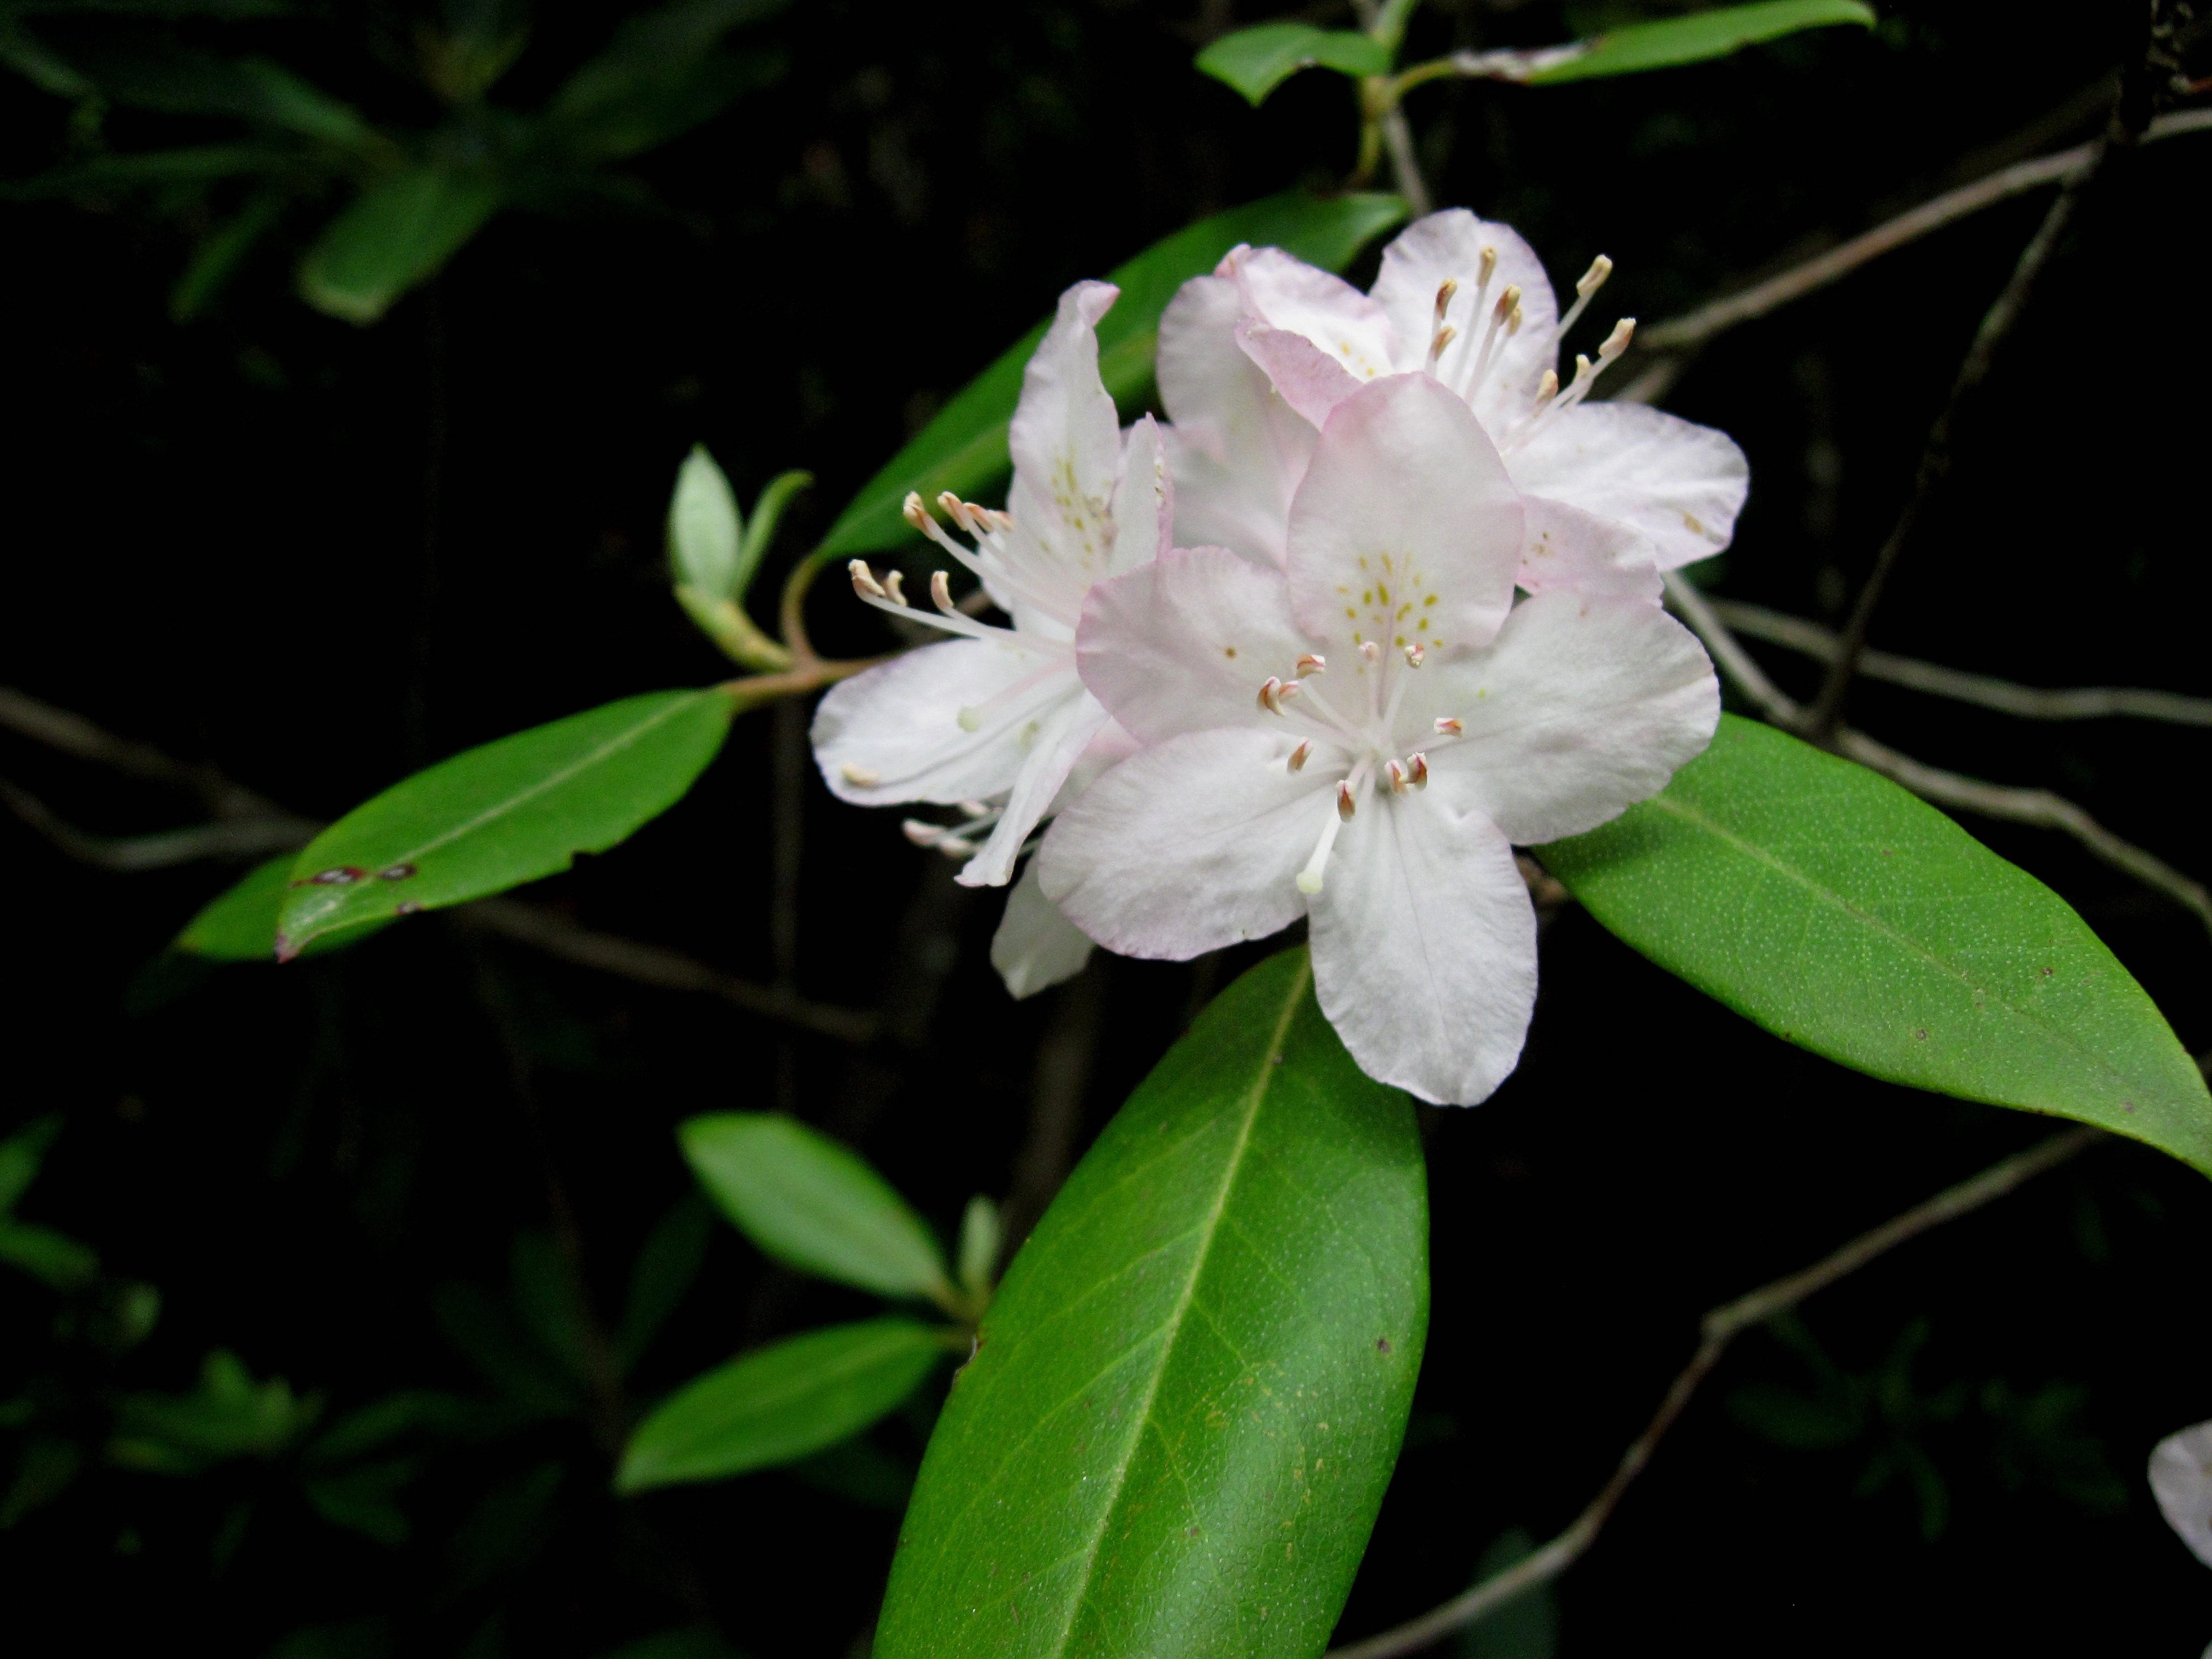 The Scientific Name is Rhododendron carolinianum. You will likely hear them called Carolina Rhododendron, Punctatum. This picture shows the Has larger flowers, leaves, and is earlier blooming than Rhododendron minus. of Rhododendron carolinianum